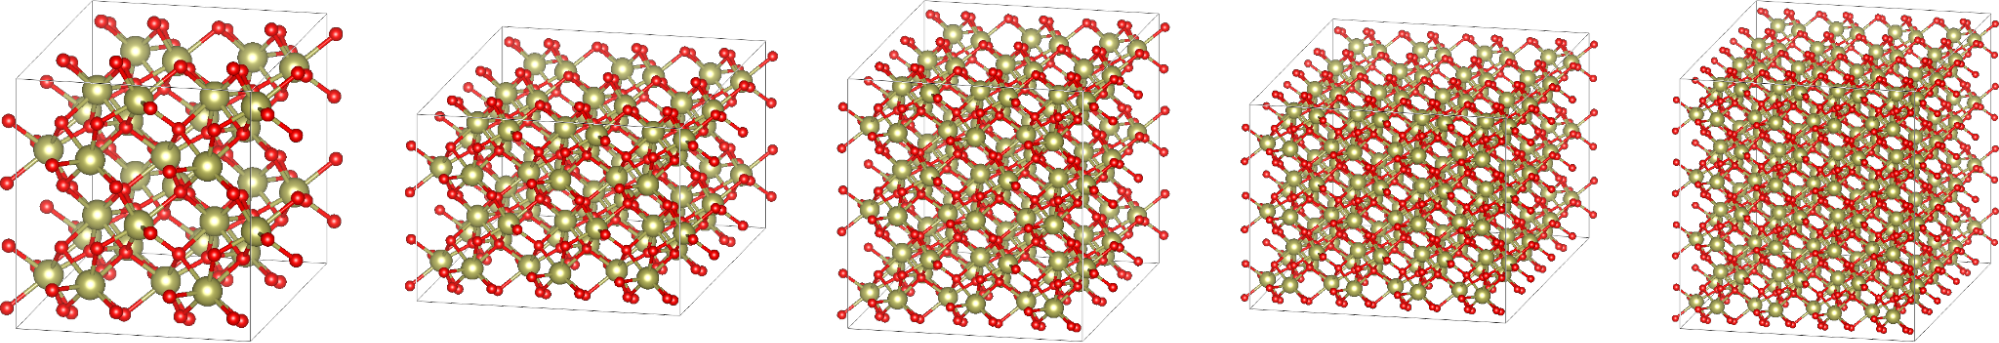 A set of five 3D diagrams of the crystal lattice for hafnia (HfO2) crystals for 96, 216, 324, 576, 768 total atom counts representing the simulations being studied here.